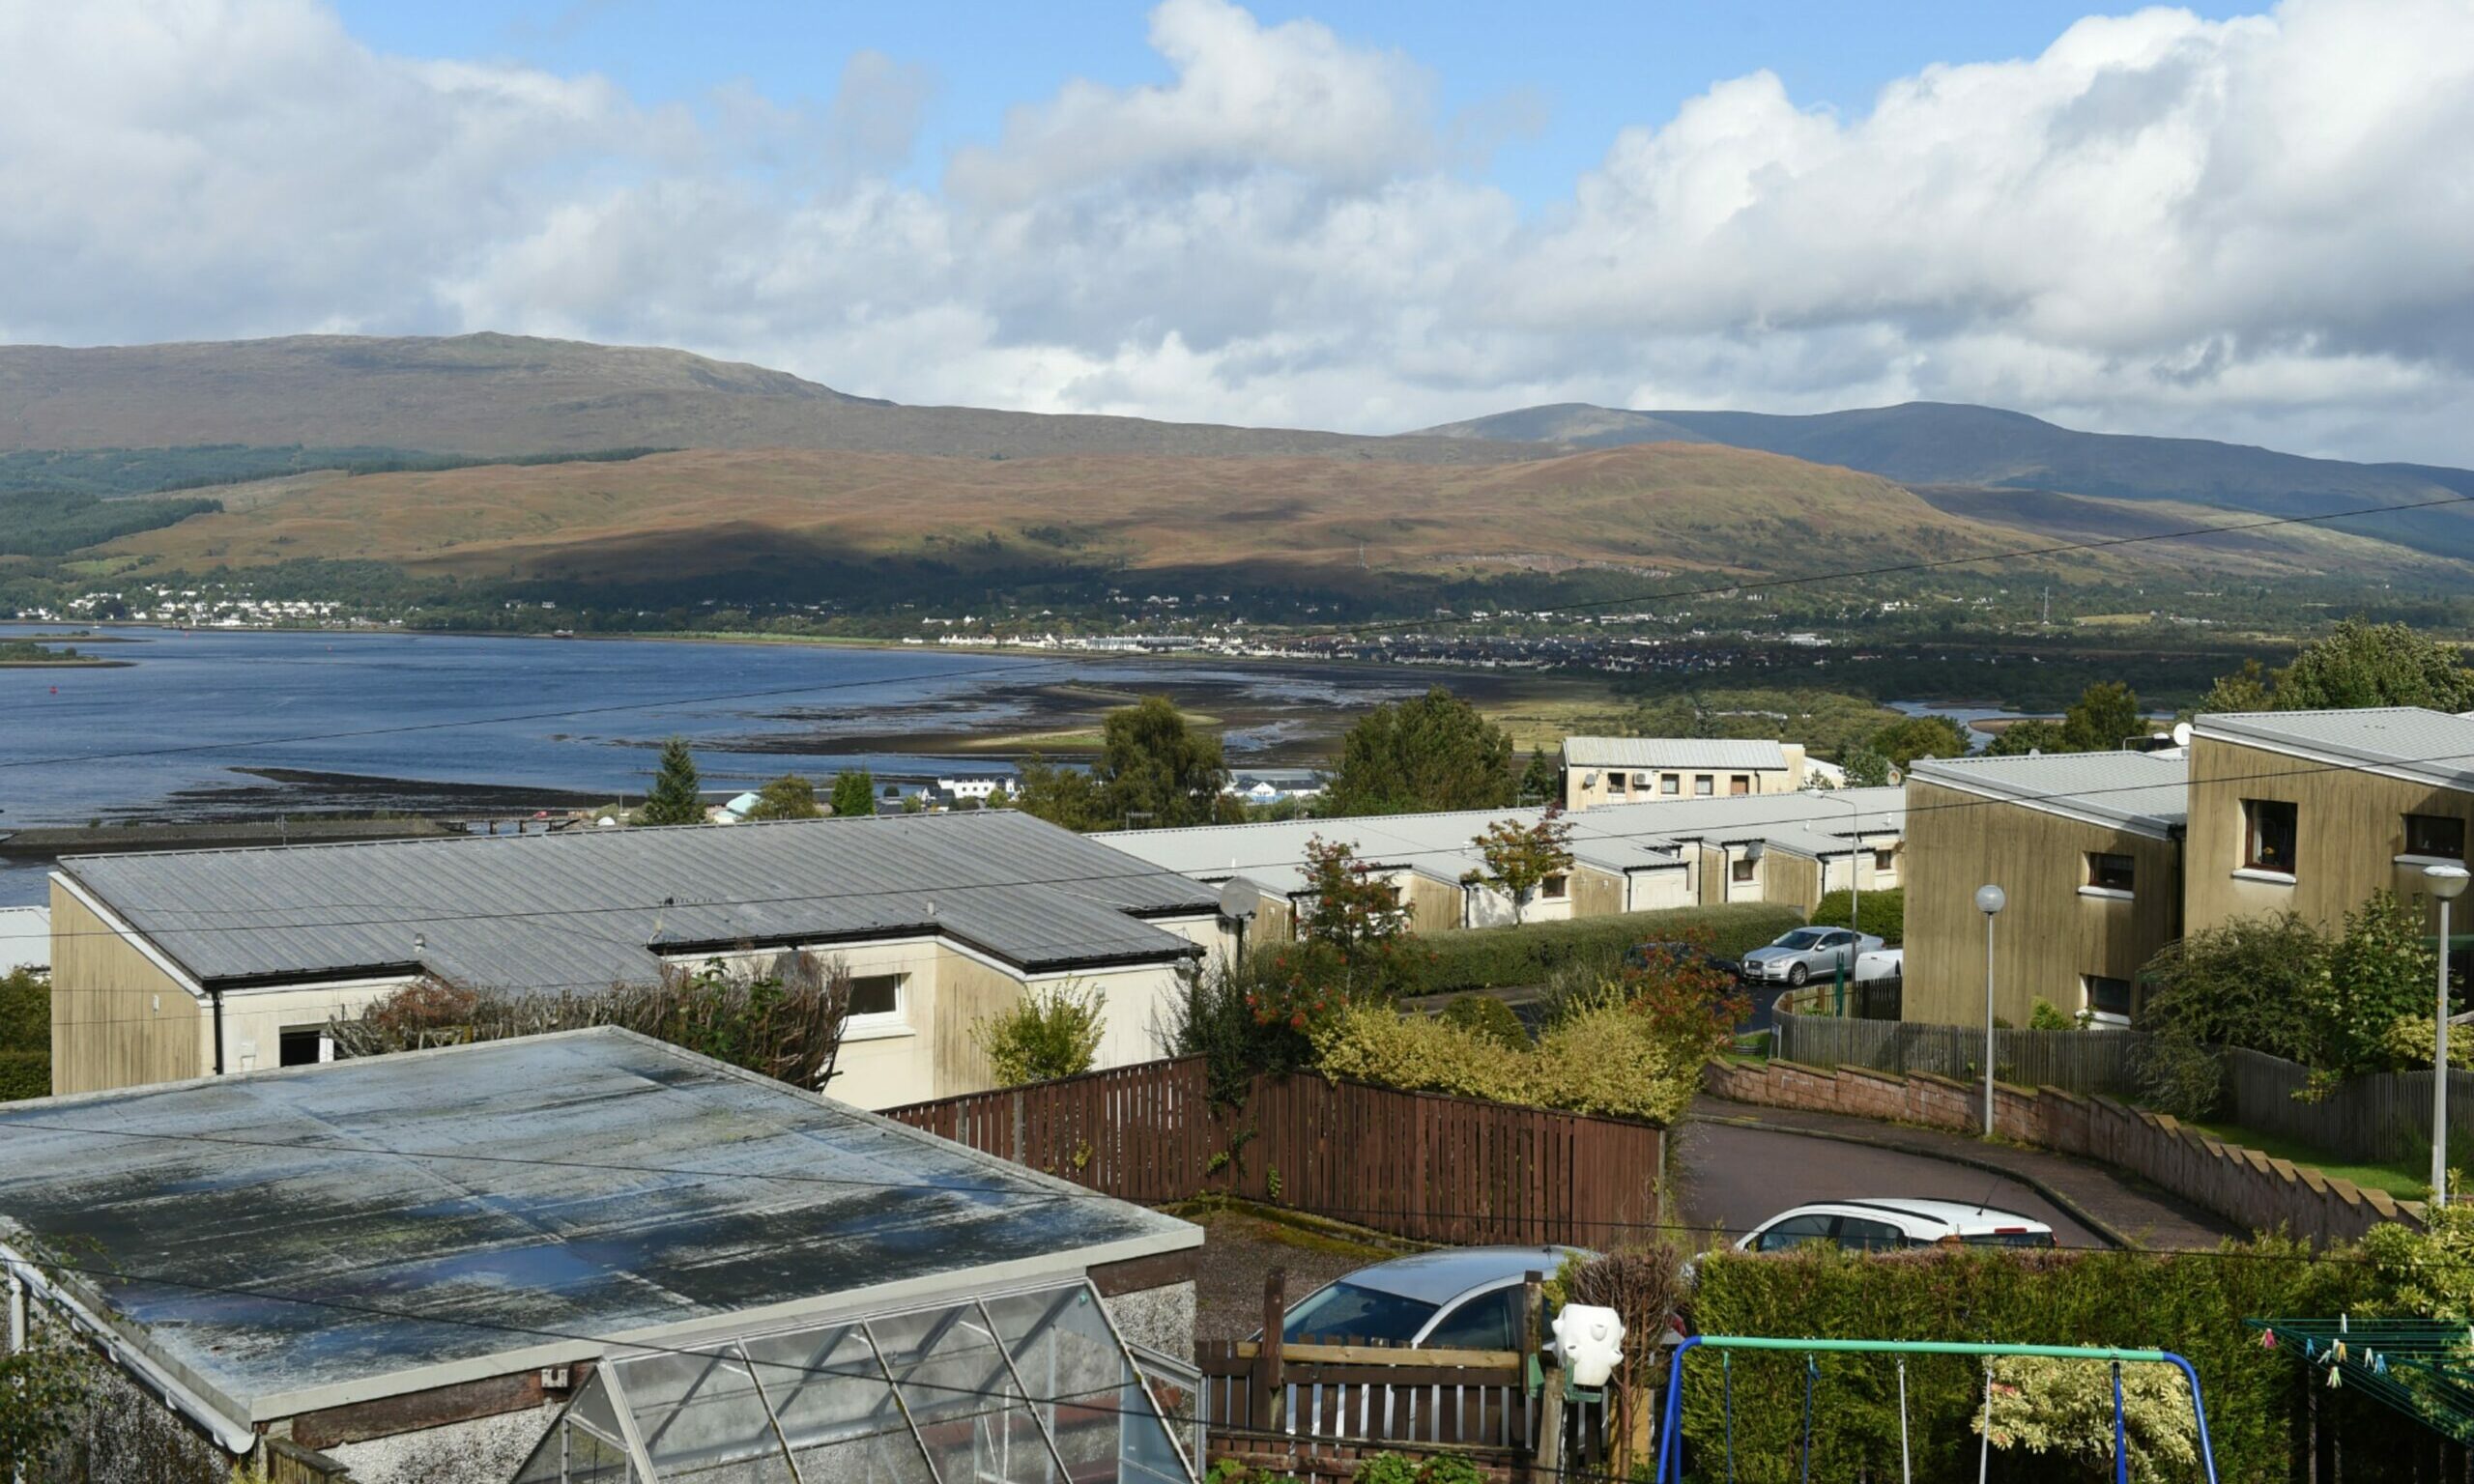 Panoramic view of Fort William and Caol as seen from Upper Achintore.